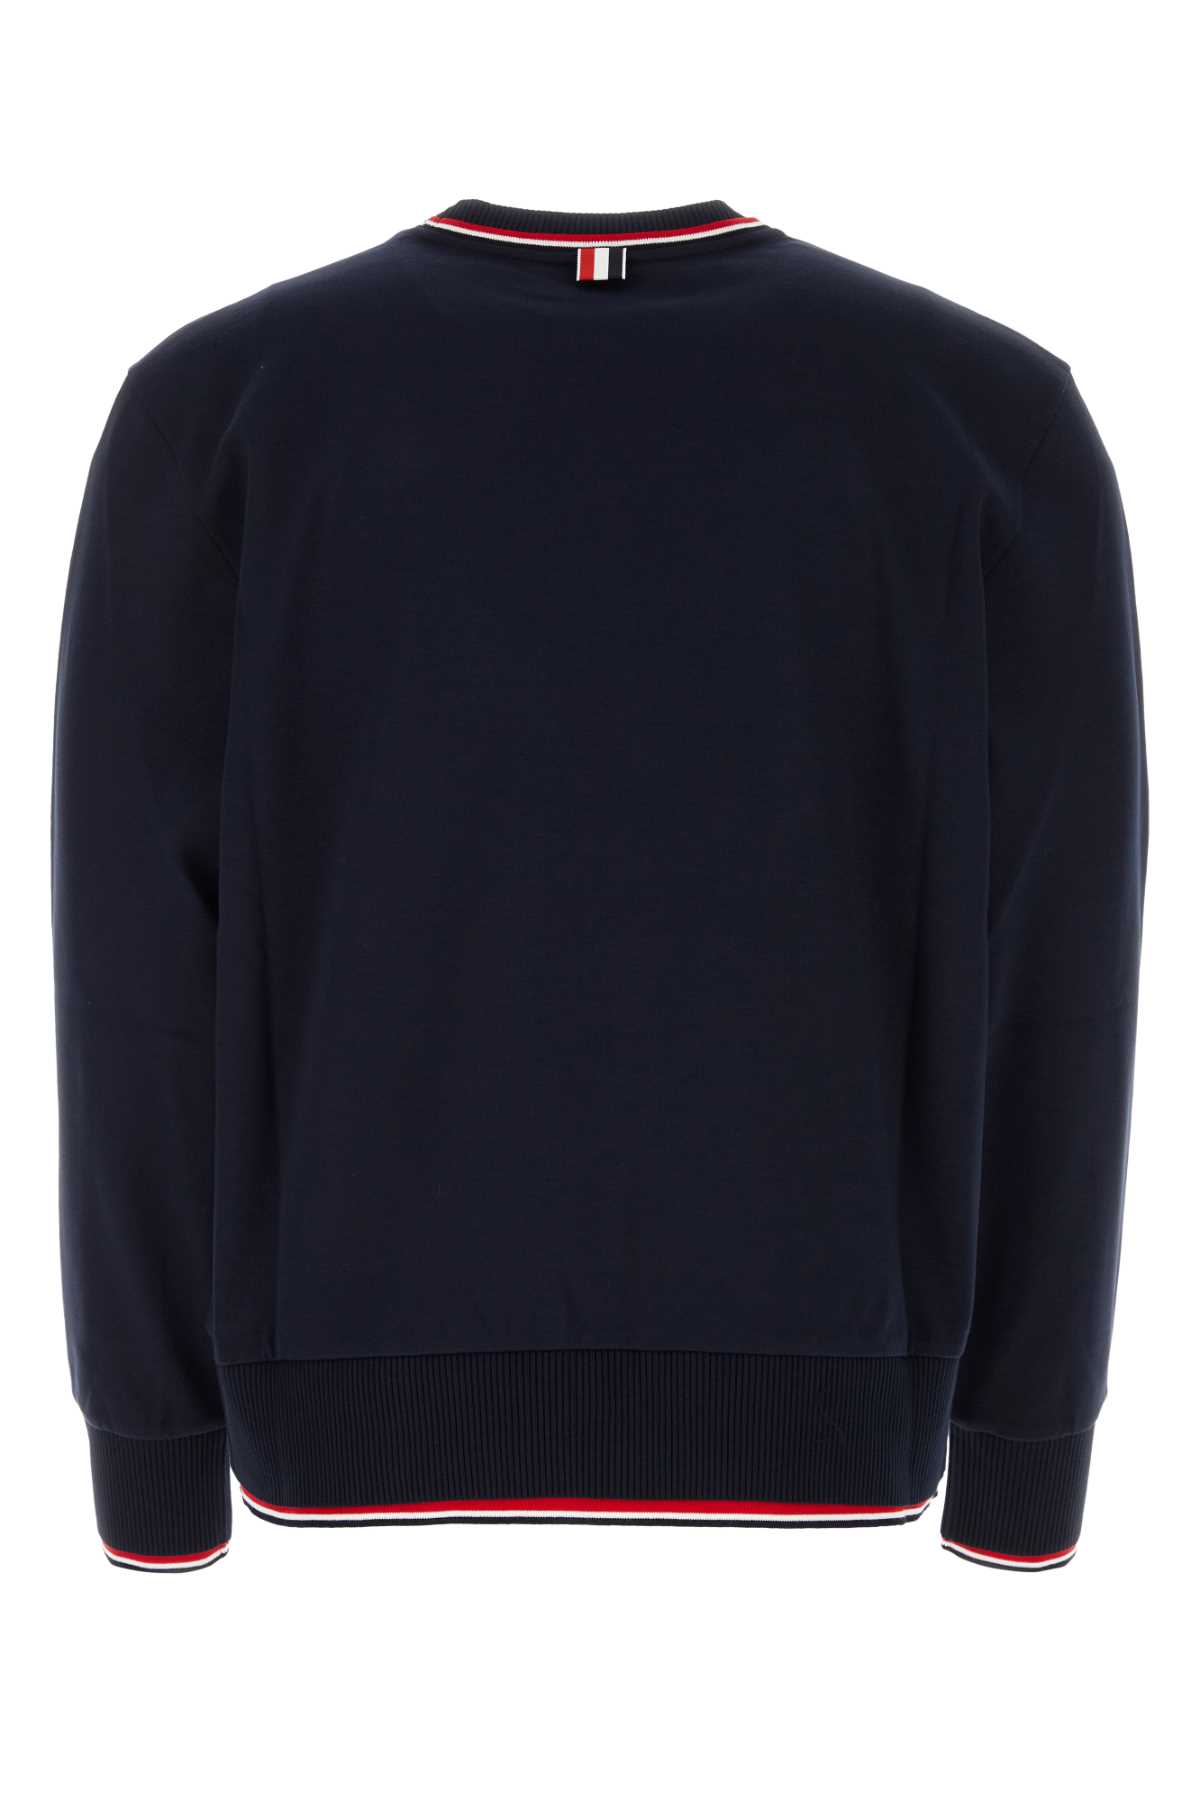 Thom Browne Midnight Blue Cotton Sweater In Navy